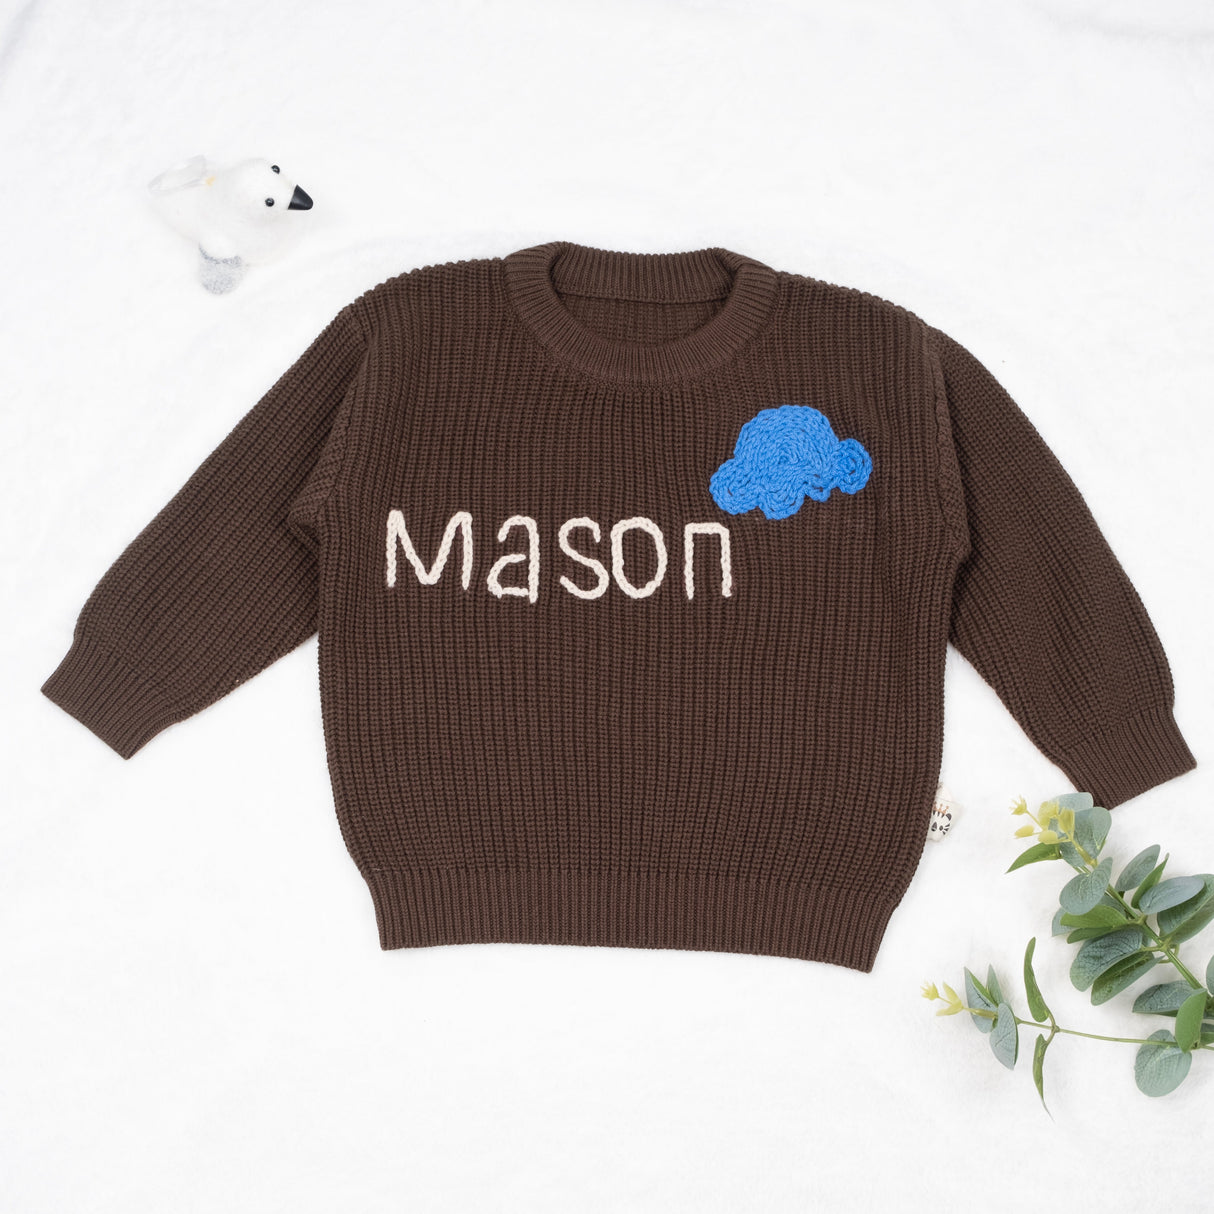 GEX Personalized Baby Sweaters Hand Embroidered Kids Sweater with Name - GexWorldwide